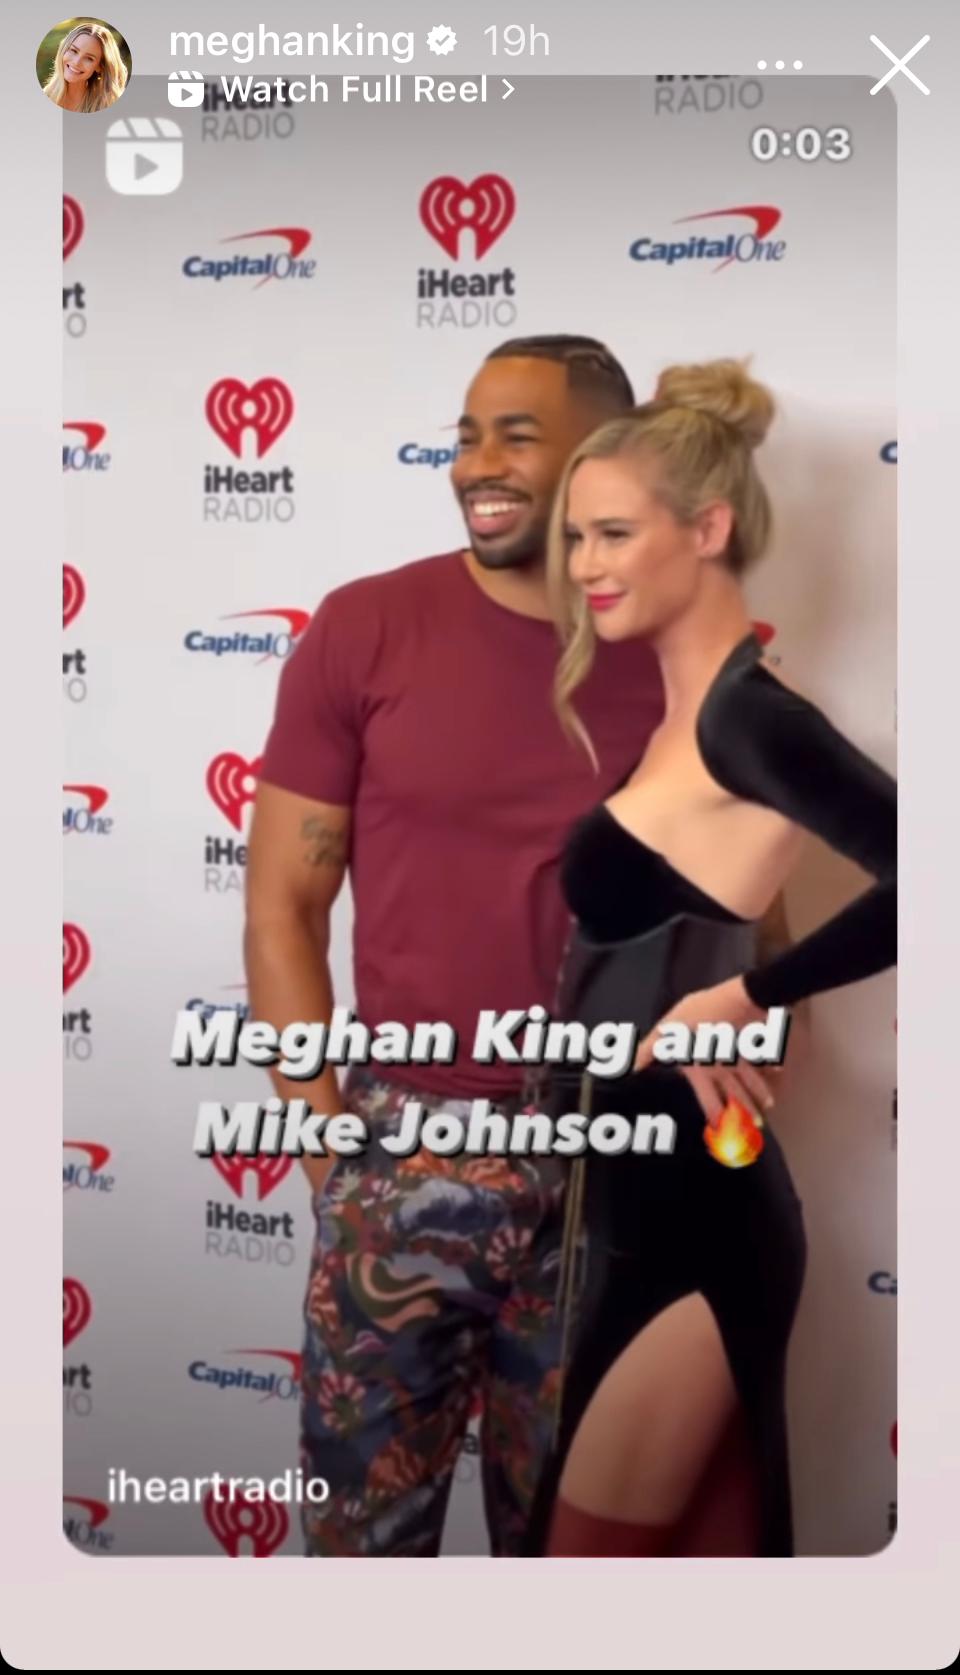 Meghan King and Mike Johnson